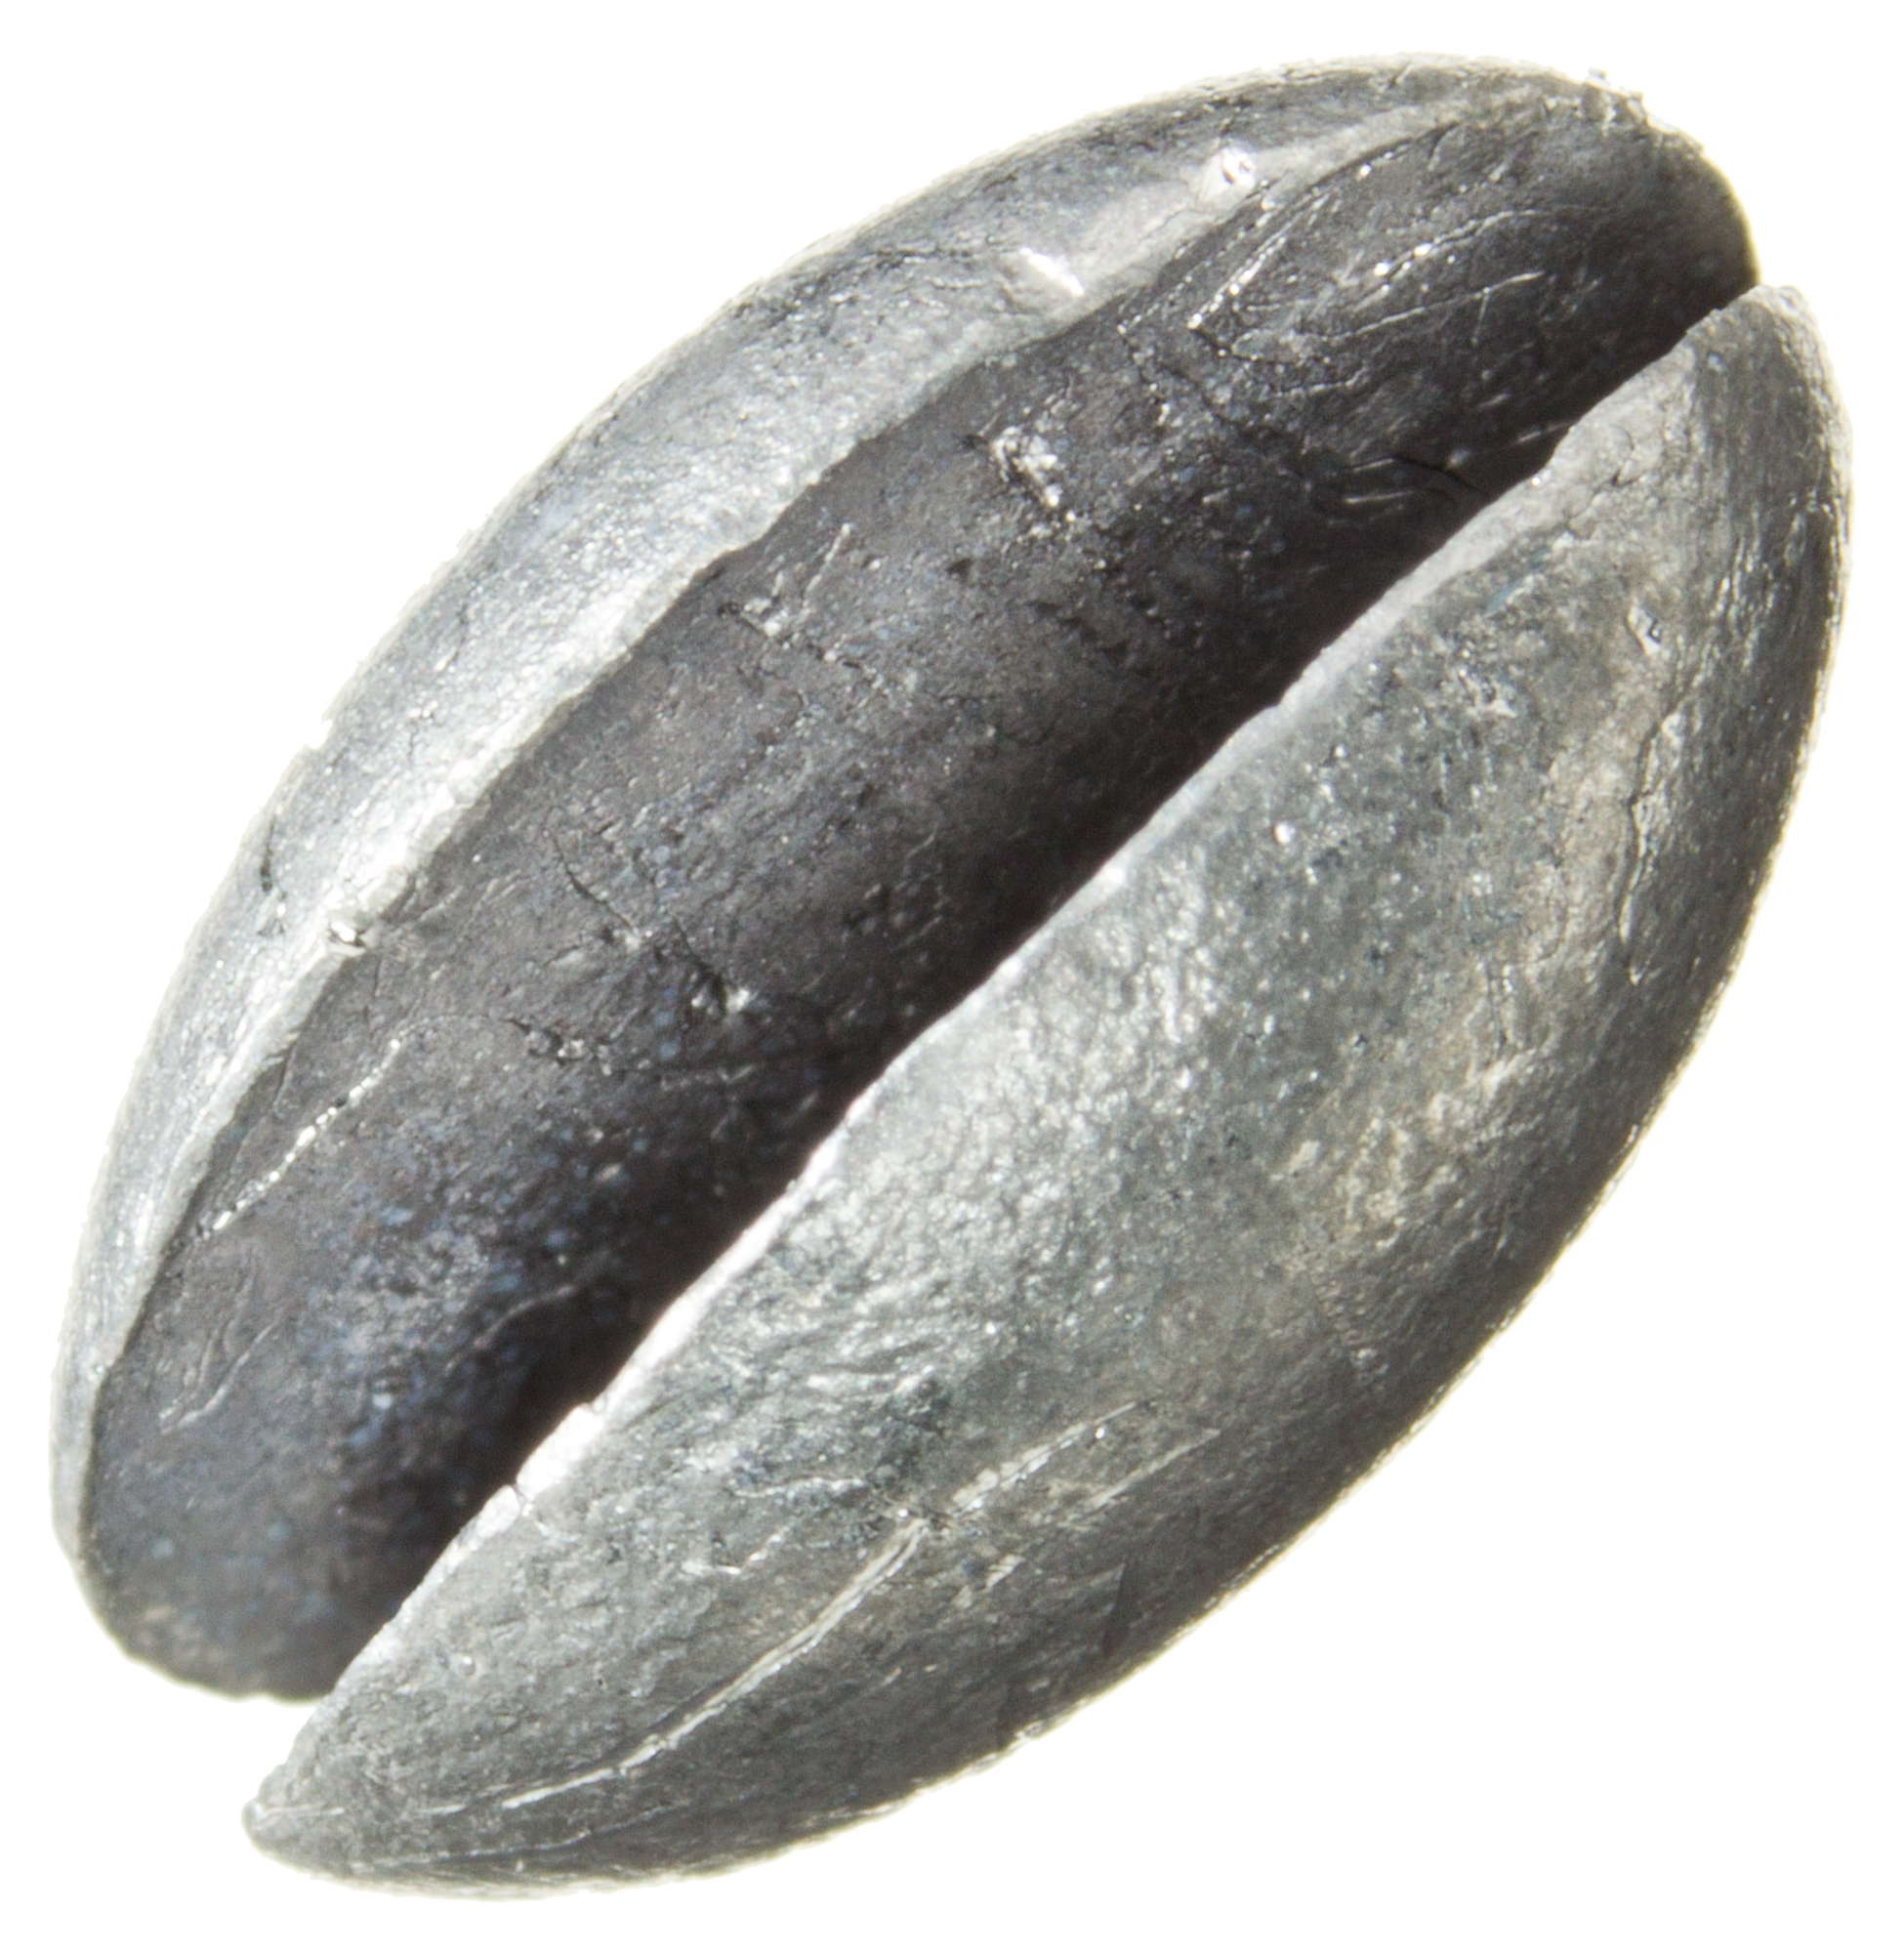  Bullet Weights Slip Sinkers 1/16 oz. 25 pc : Fishing Sinkers :  Sports & Outdoors